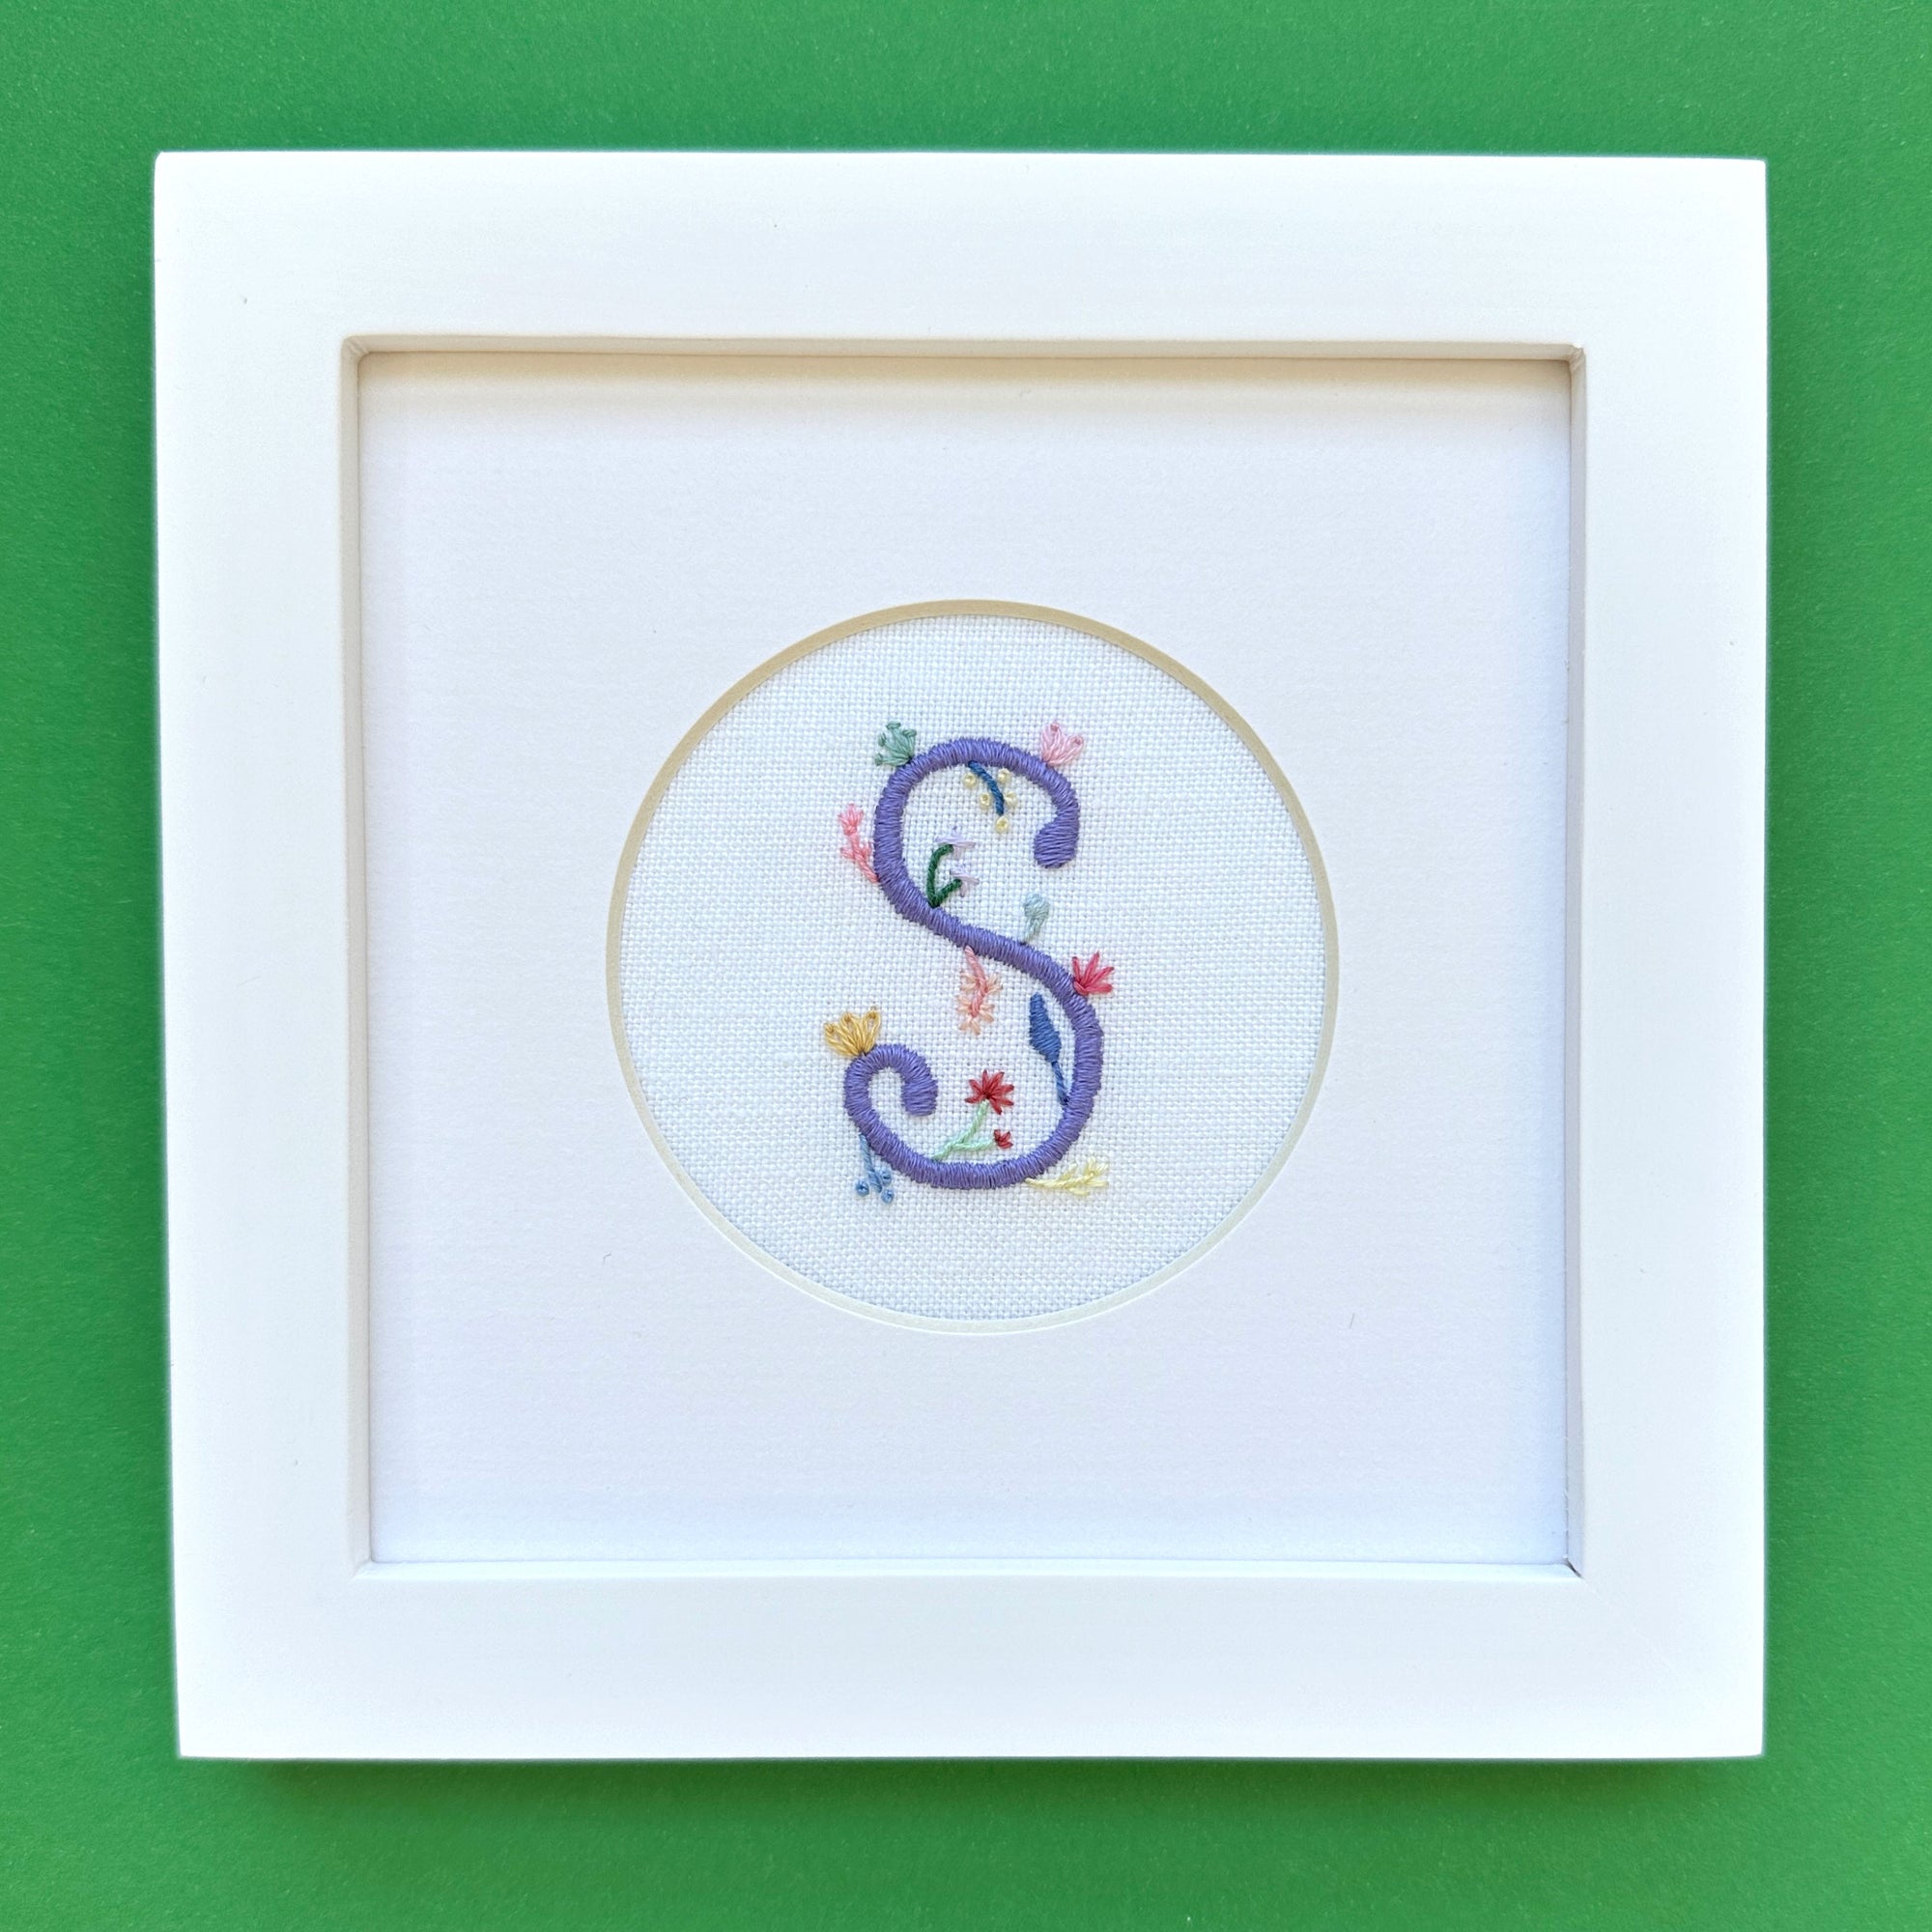 "S" Hand Embroidered Floral Monogram Art